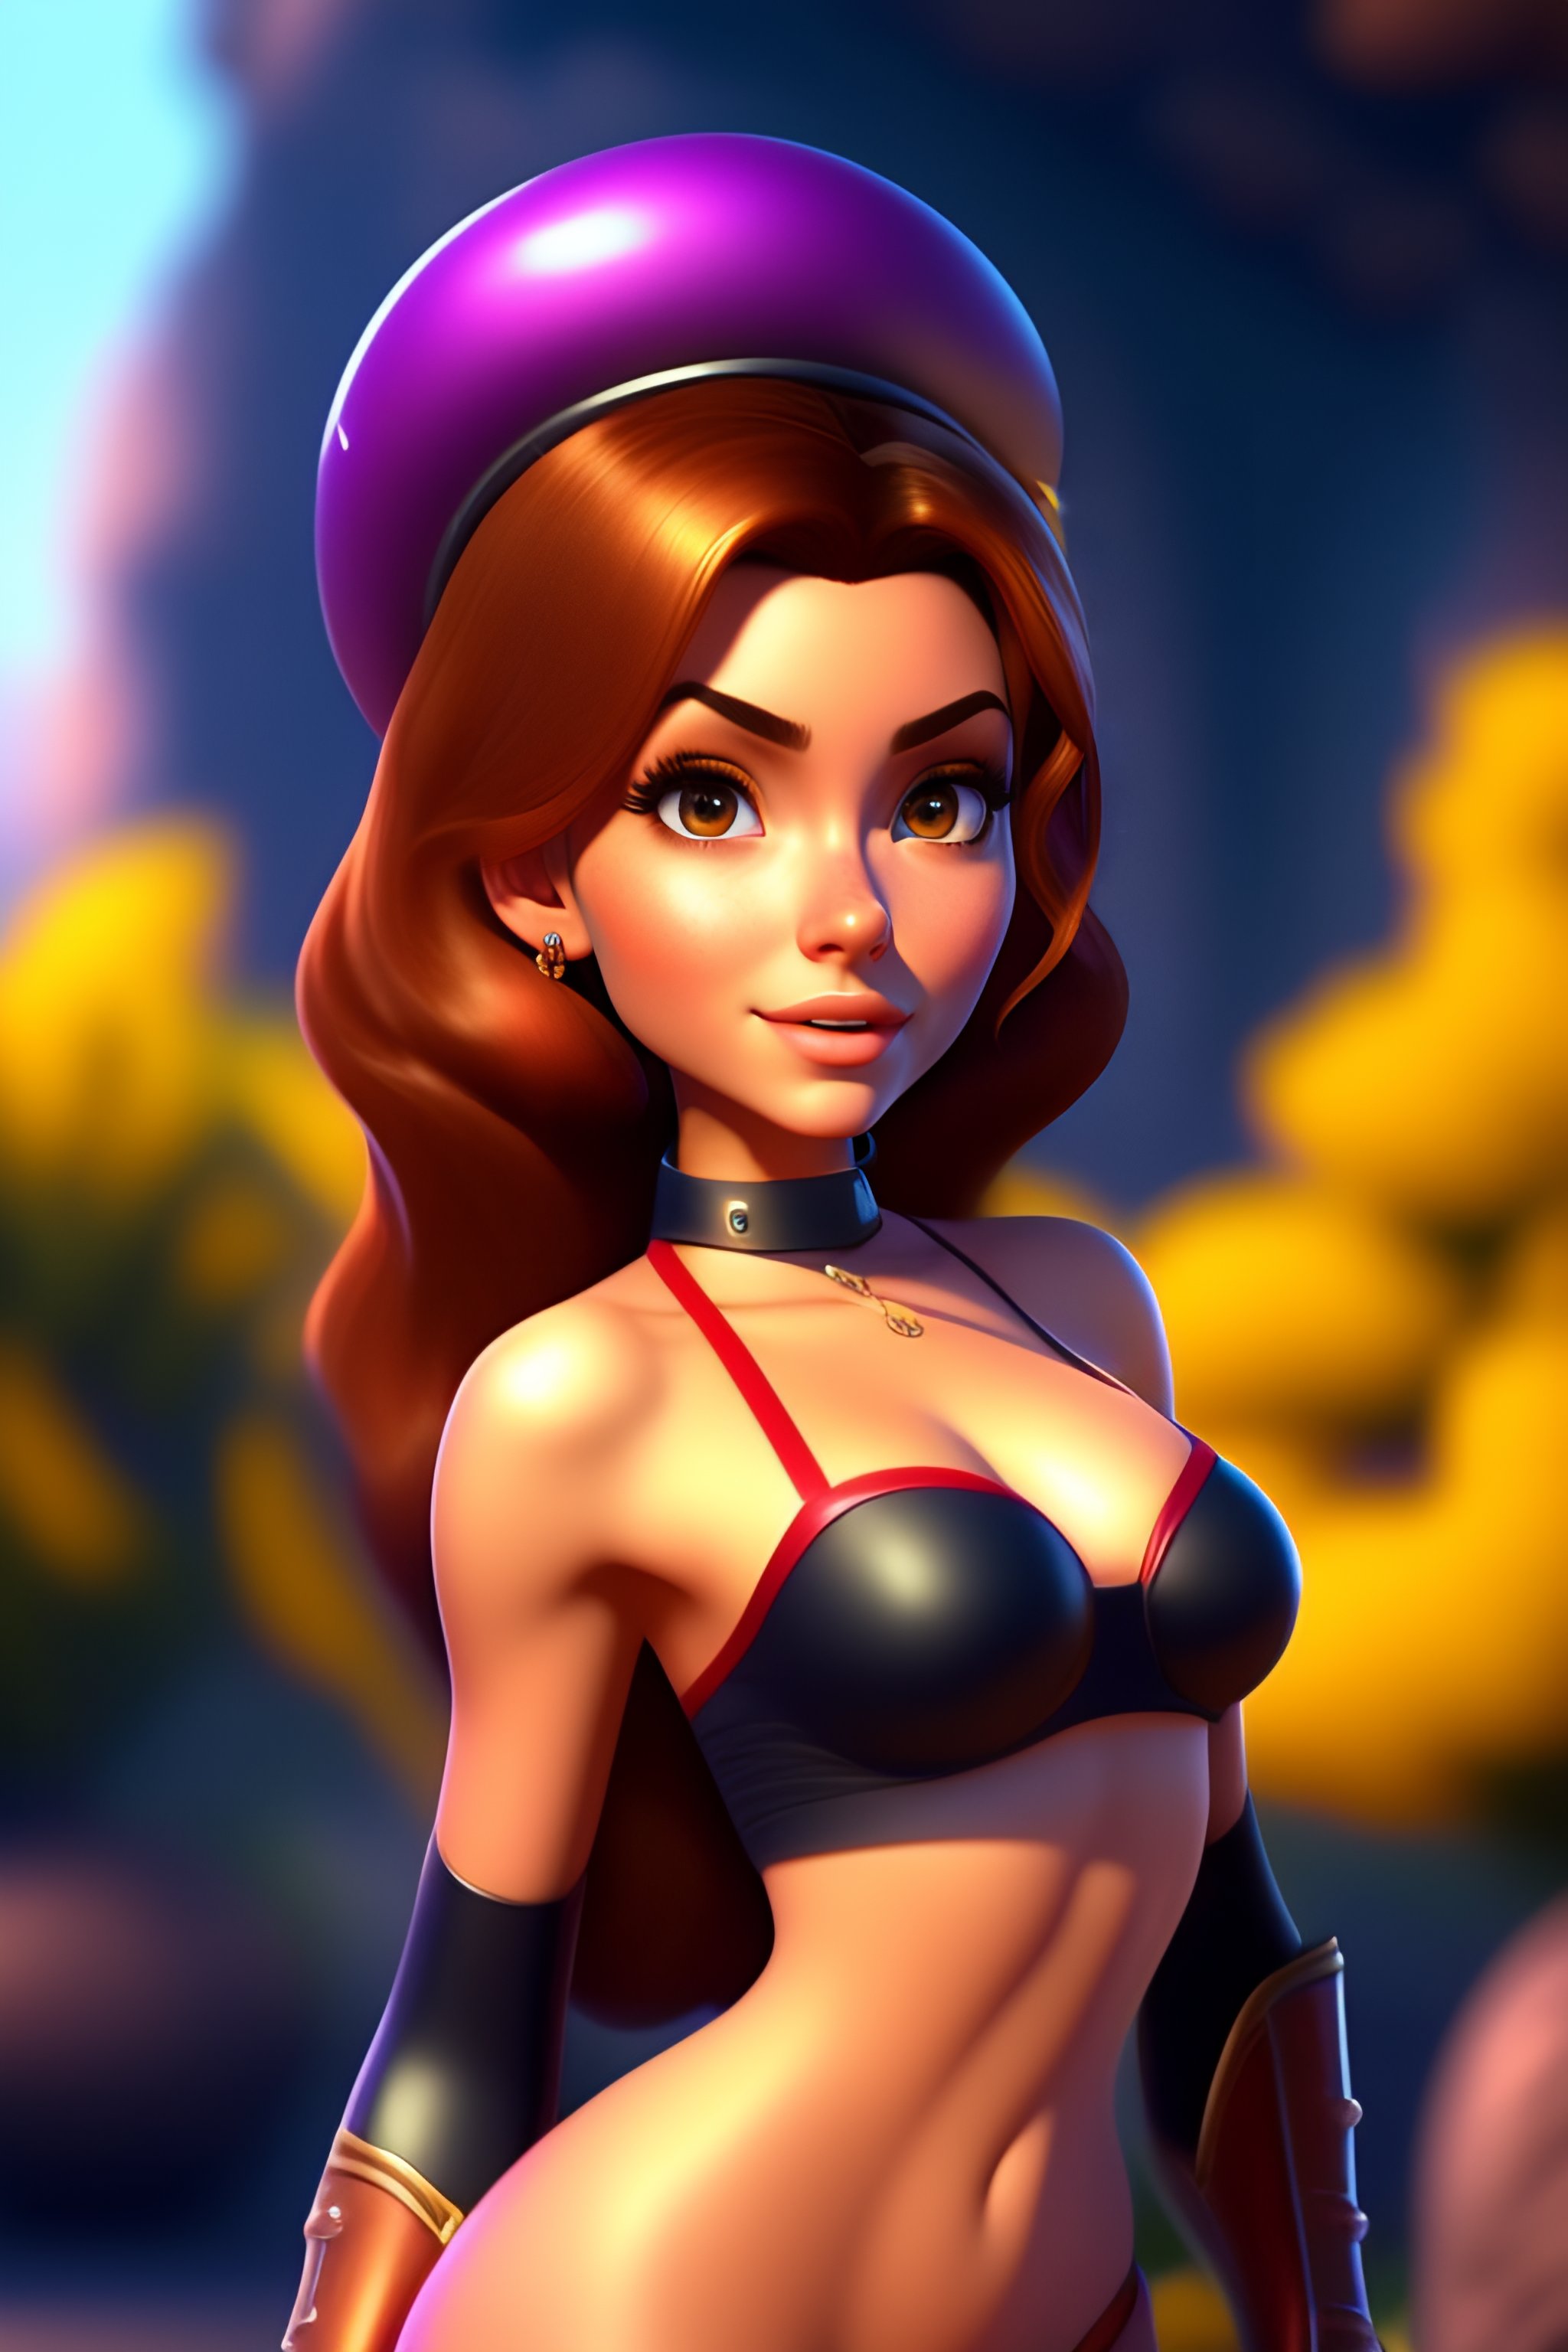 Lexica - Very hot girl, without bra, without pan, pixar style, 3d